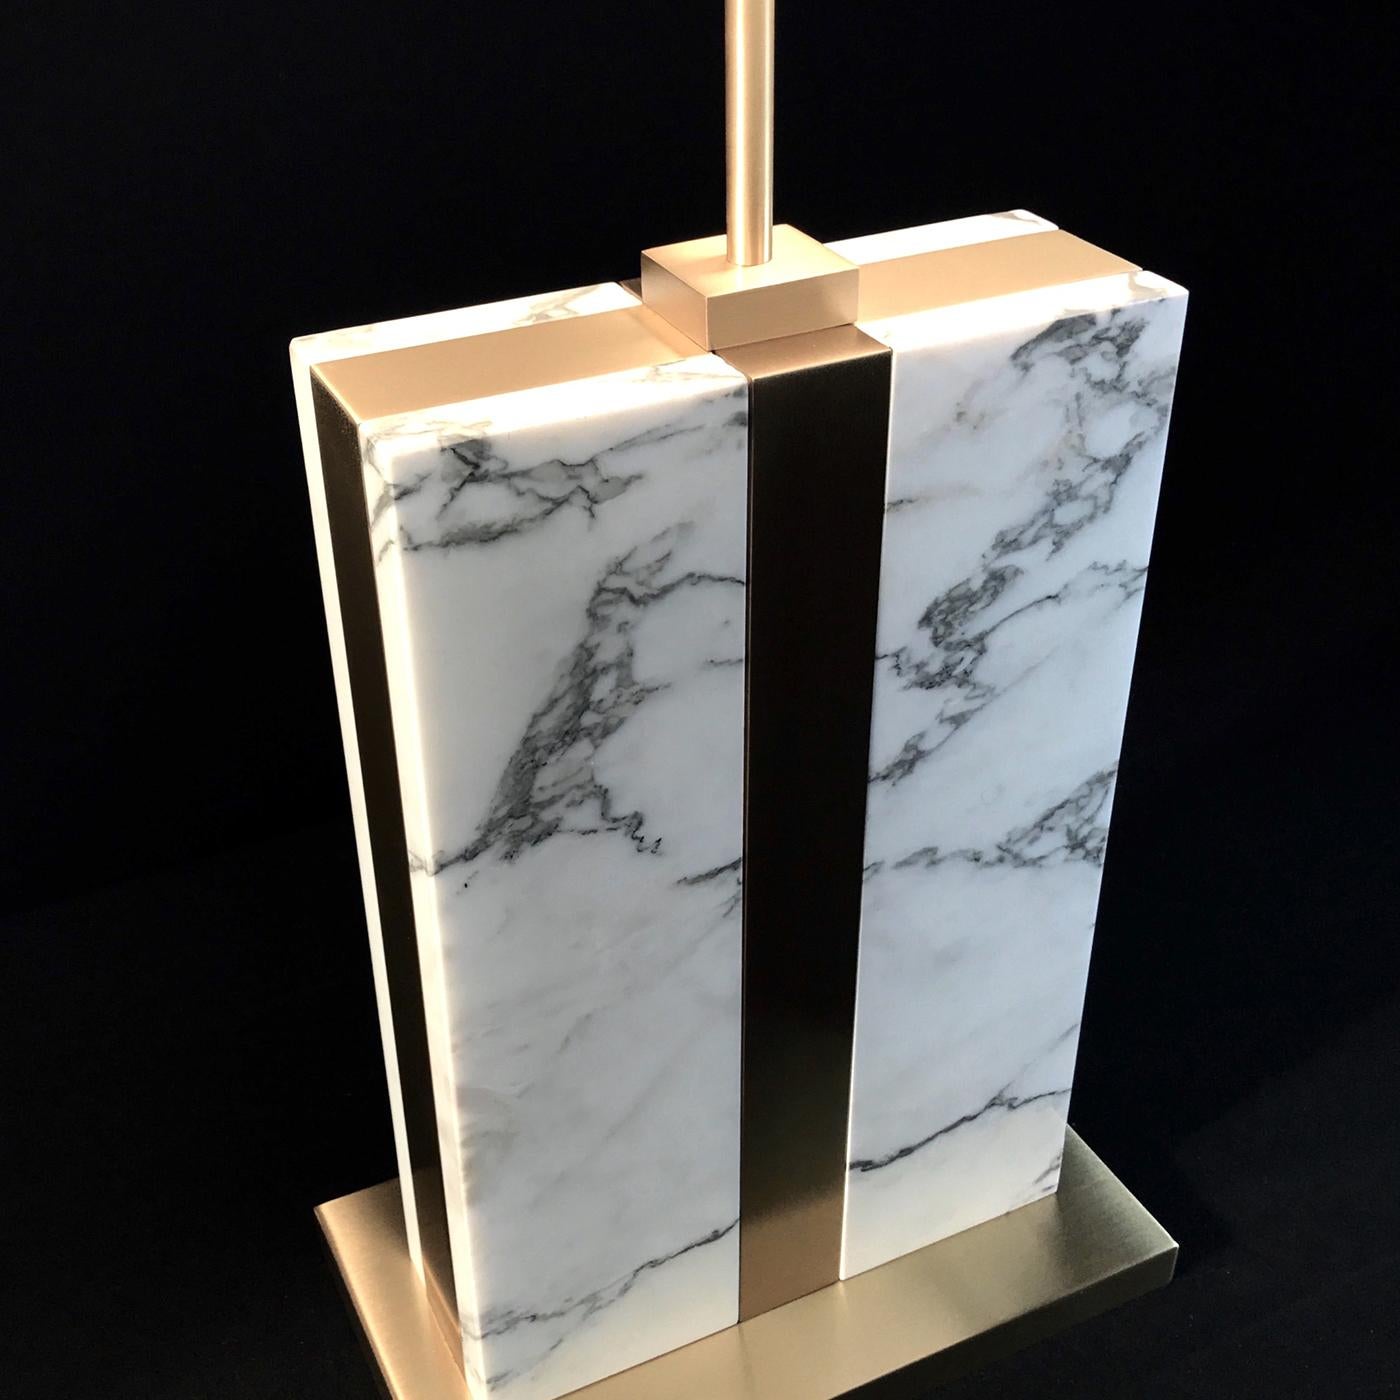 Combining brass and marble in a Classic silhouette, this table lamp's luxurious aesthetic is matched by its timeless elegance. Raised on a square satin brass base, the Arabescato Carrara marble body is held by a satin brass support connected to a